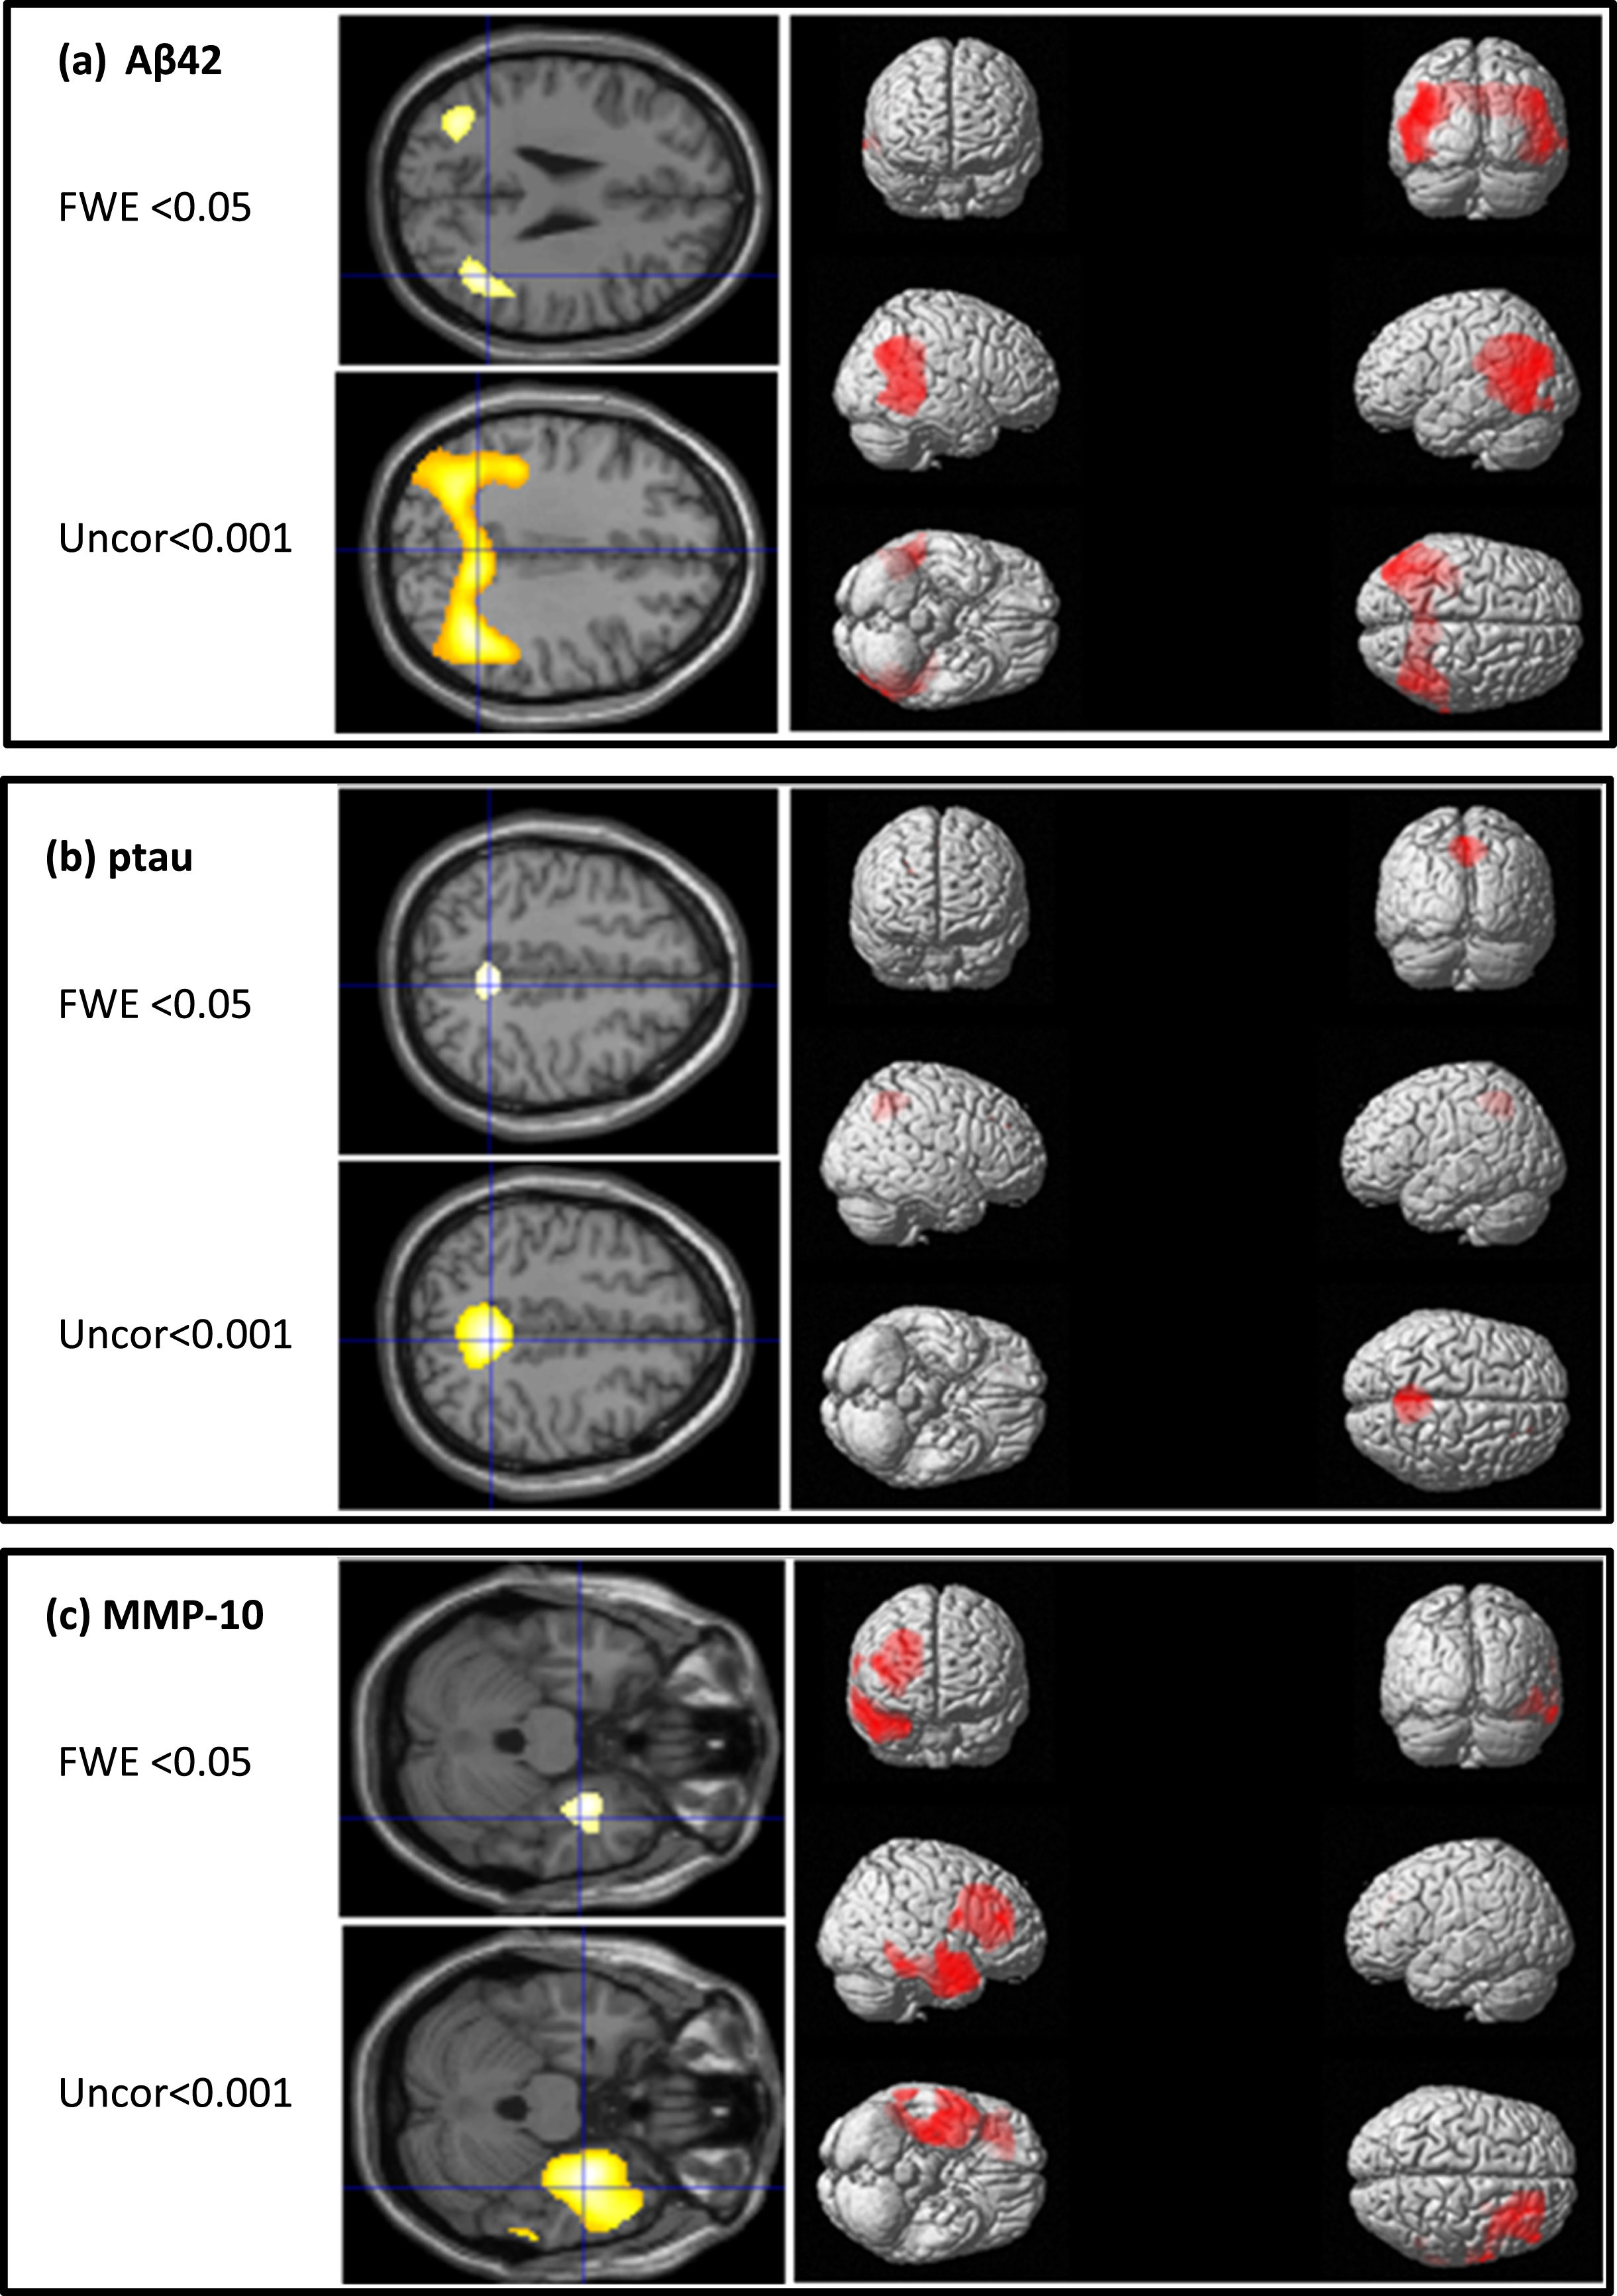 Overlays of clusters of hypoperfusion on MRI associated with changes in (a) Aβ42, (b) ptau, and (c) MMP-10 at FEW <0.05 and uncorrected <0.001 levels and surface rendering at the uncorrected <0.001 level.